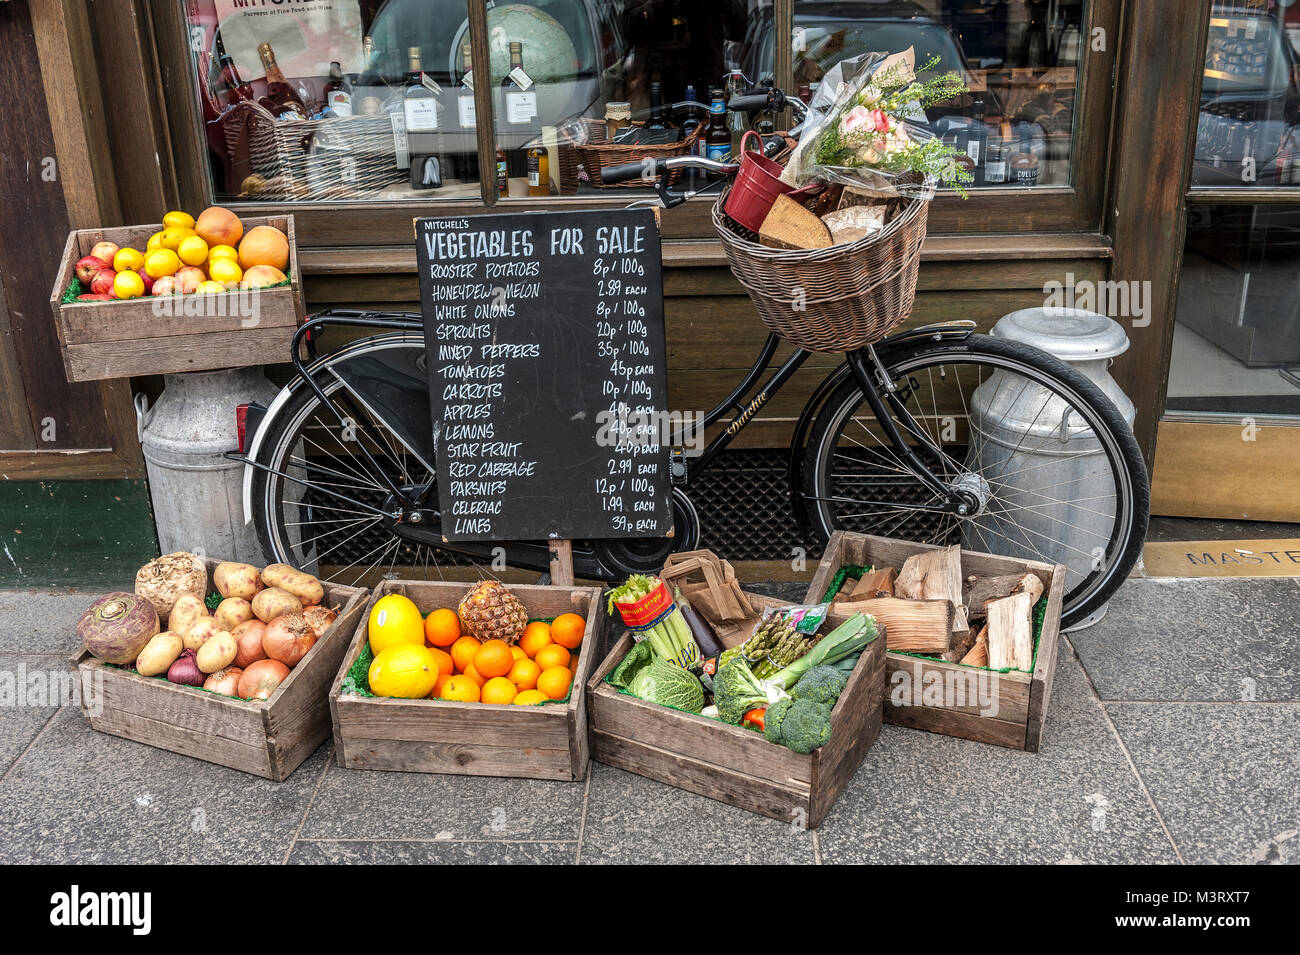 Vegetables for sale surround by an old fashioned delivery bike with baskets of fruit galvanised milk churn and advertising board outside a traditional Stock Photo